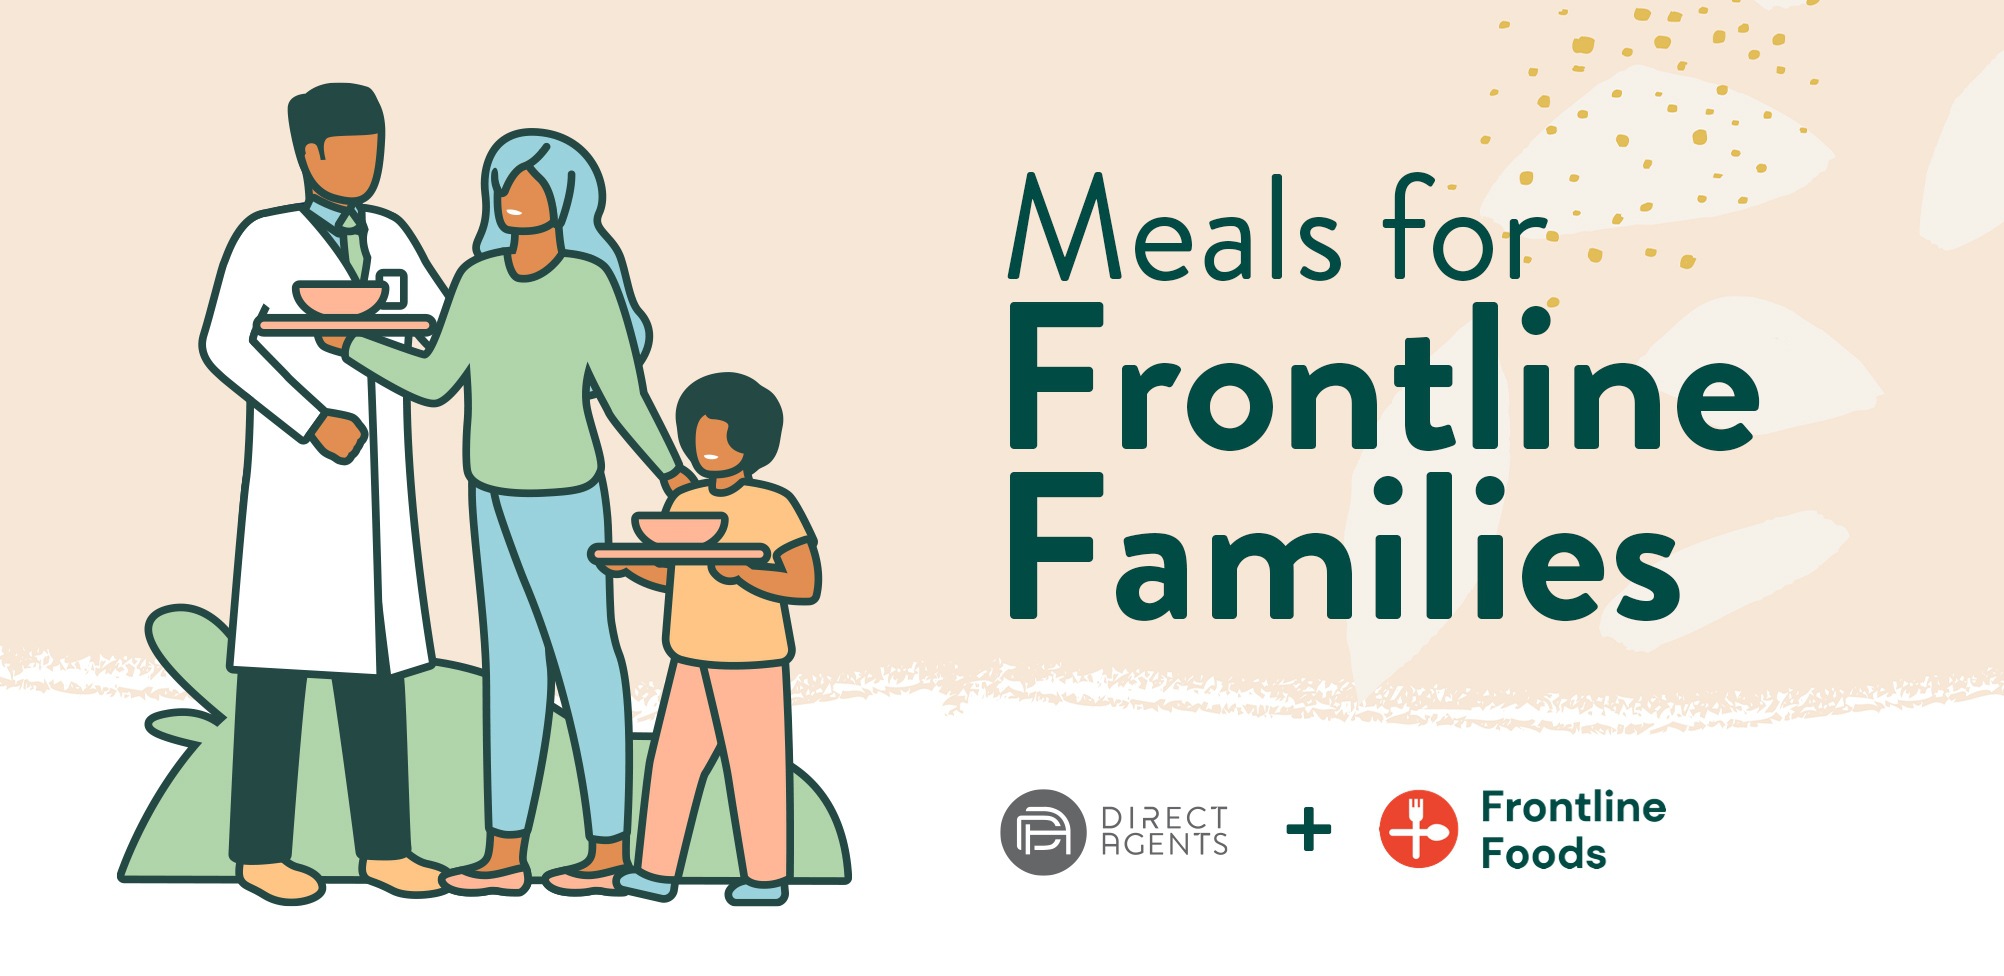 Meals for Frontline Families